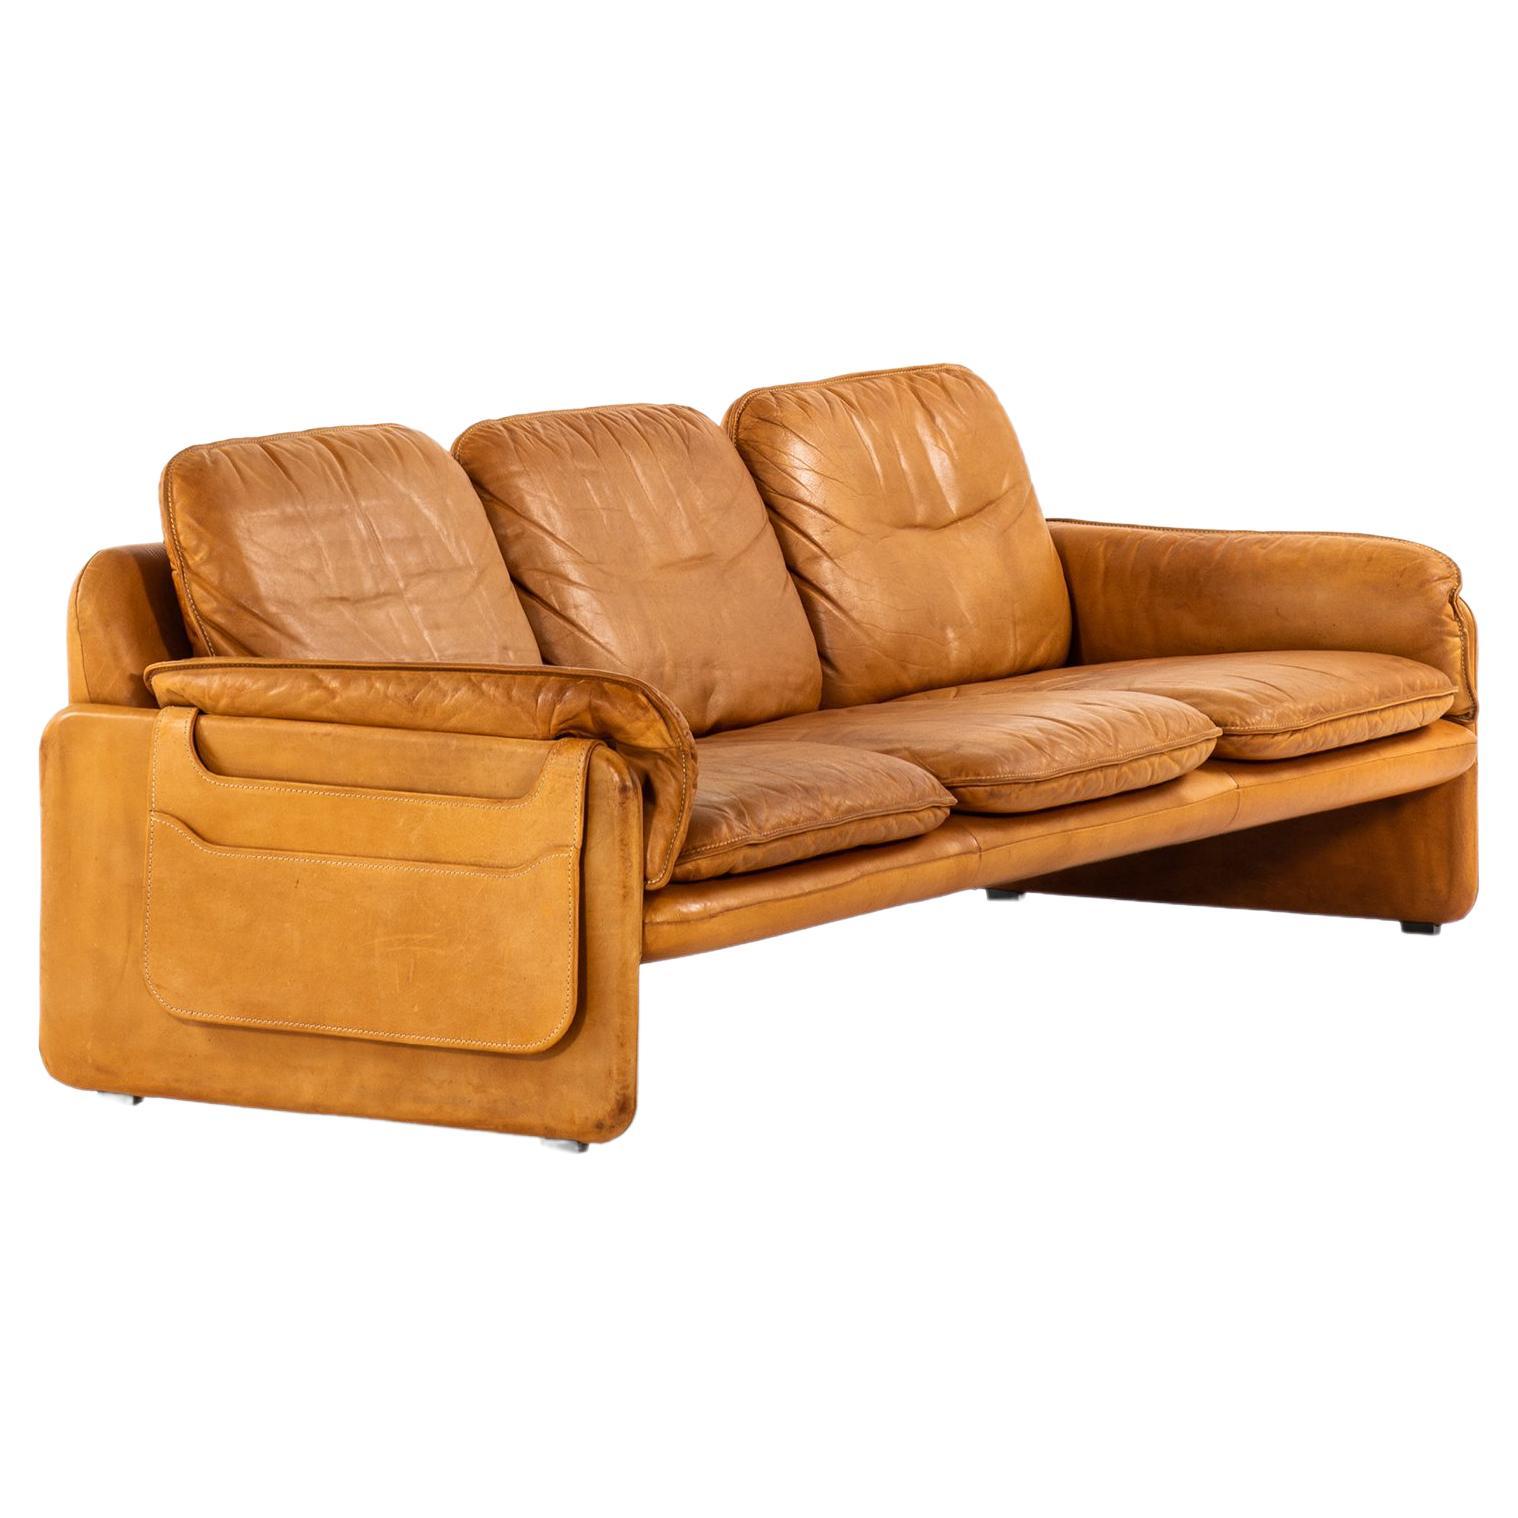 Sofa Model DS-61 Produced by De Sede in Switzerland For Sale